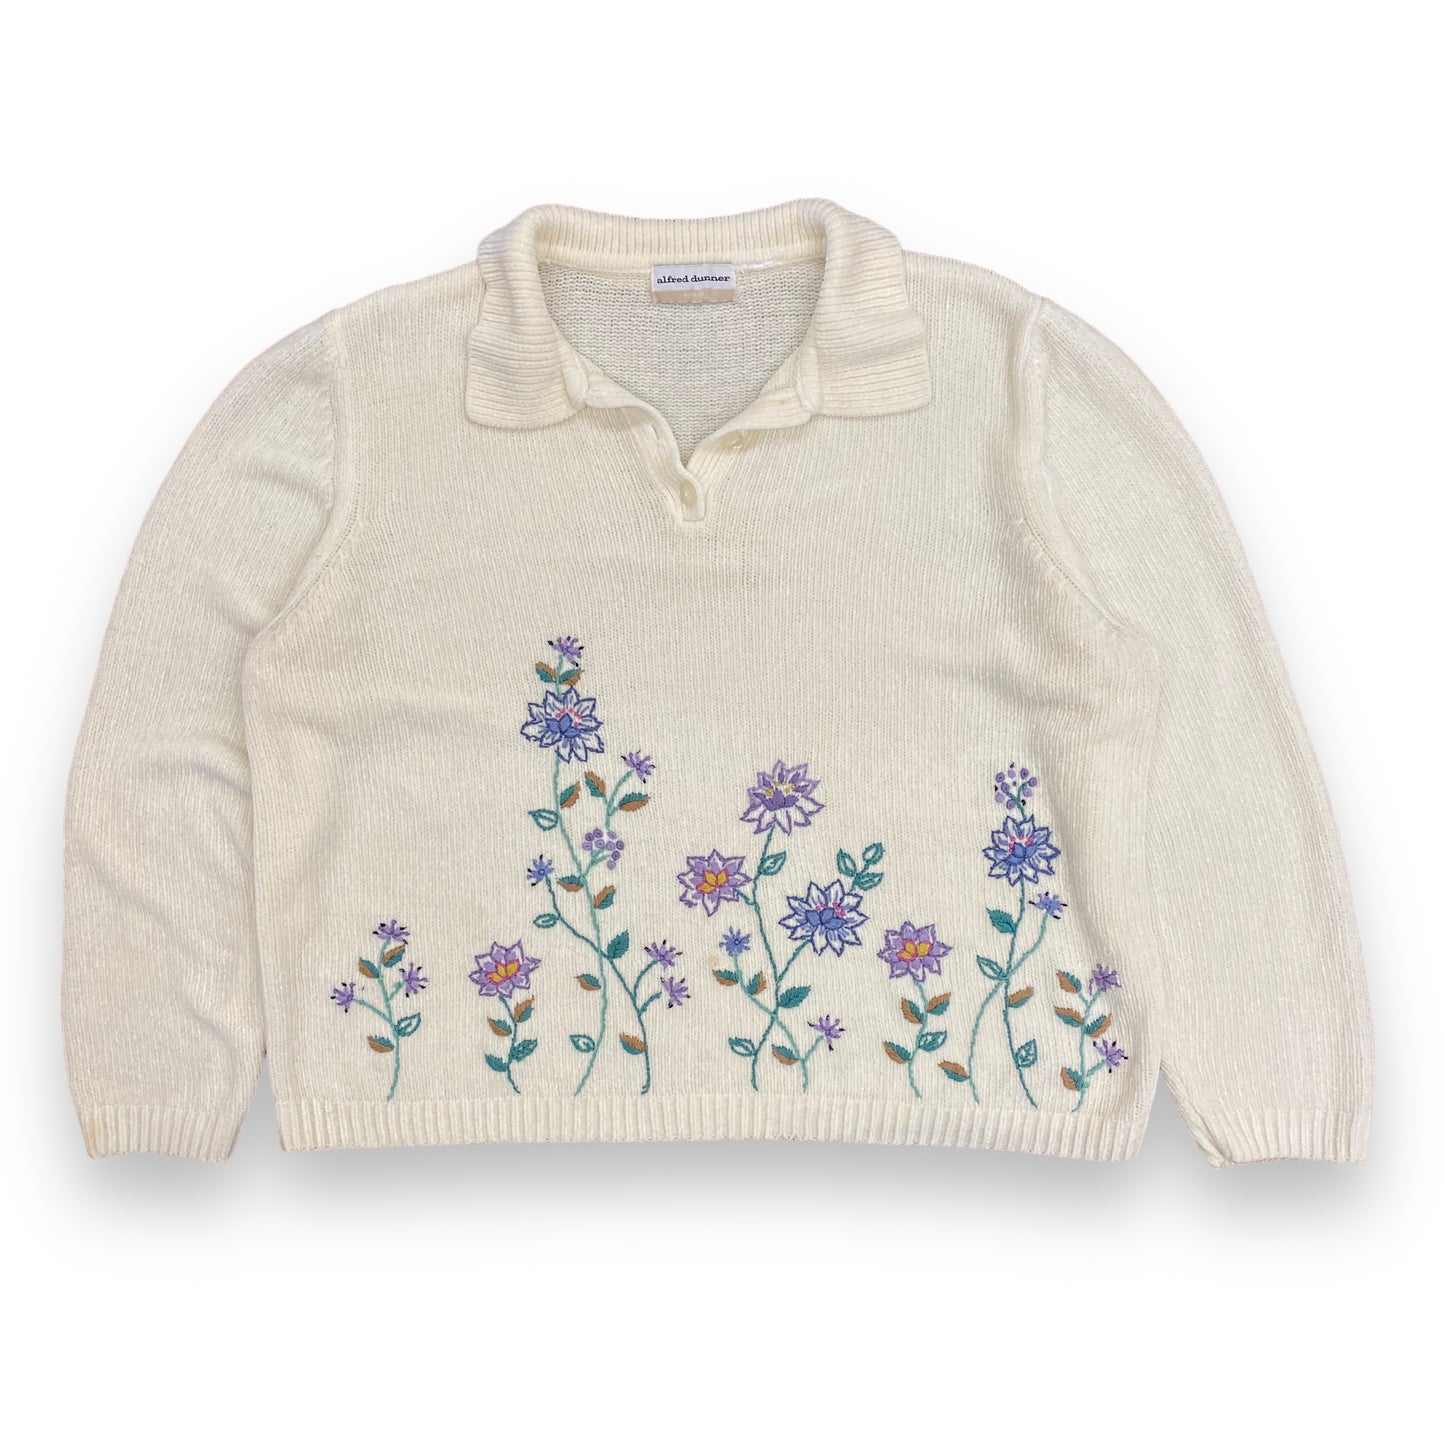 1990s Floral Collared Sweater - Size Large